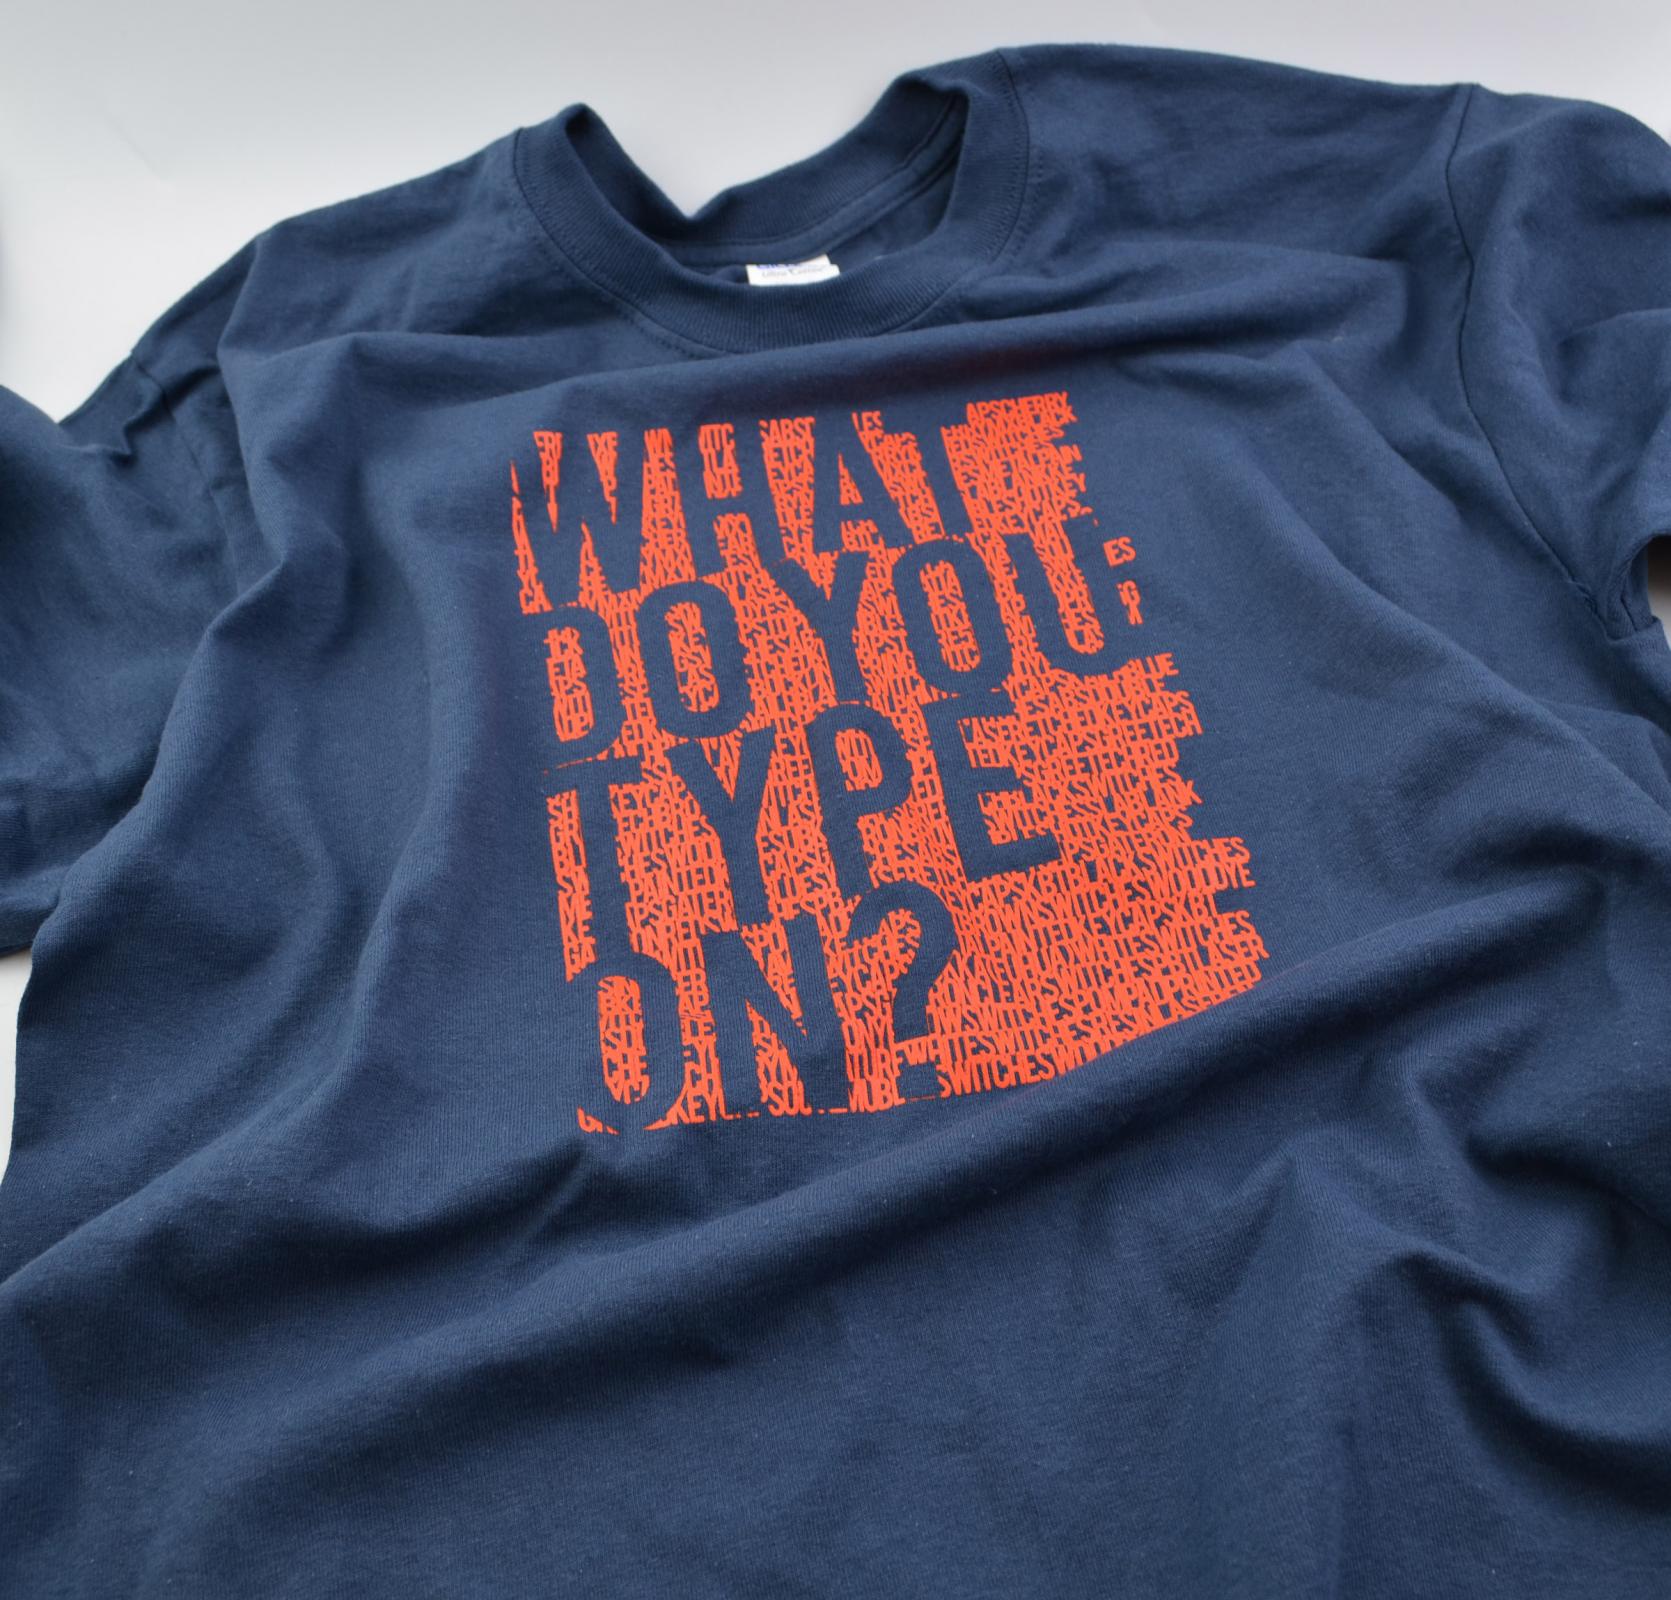 MK What do you type on? Navy T-Shirt MKWBRUDXOU |0|